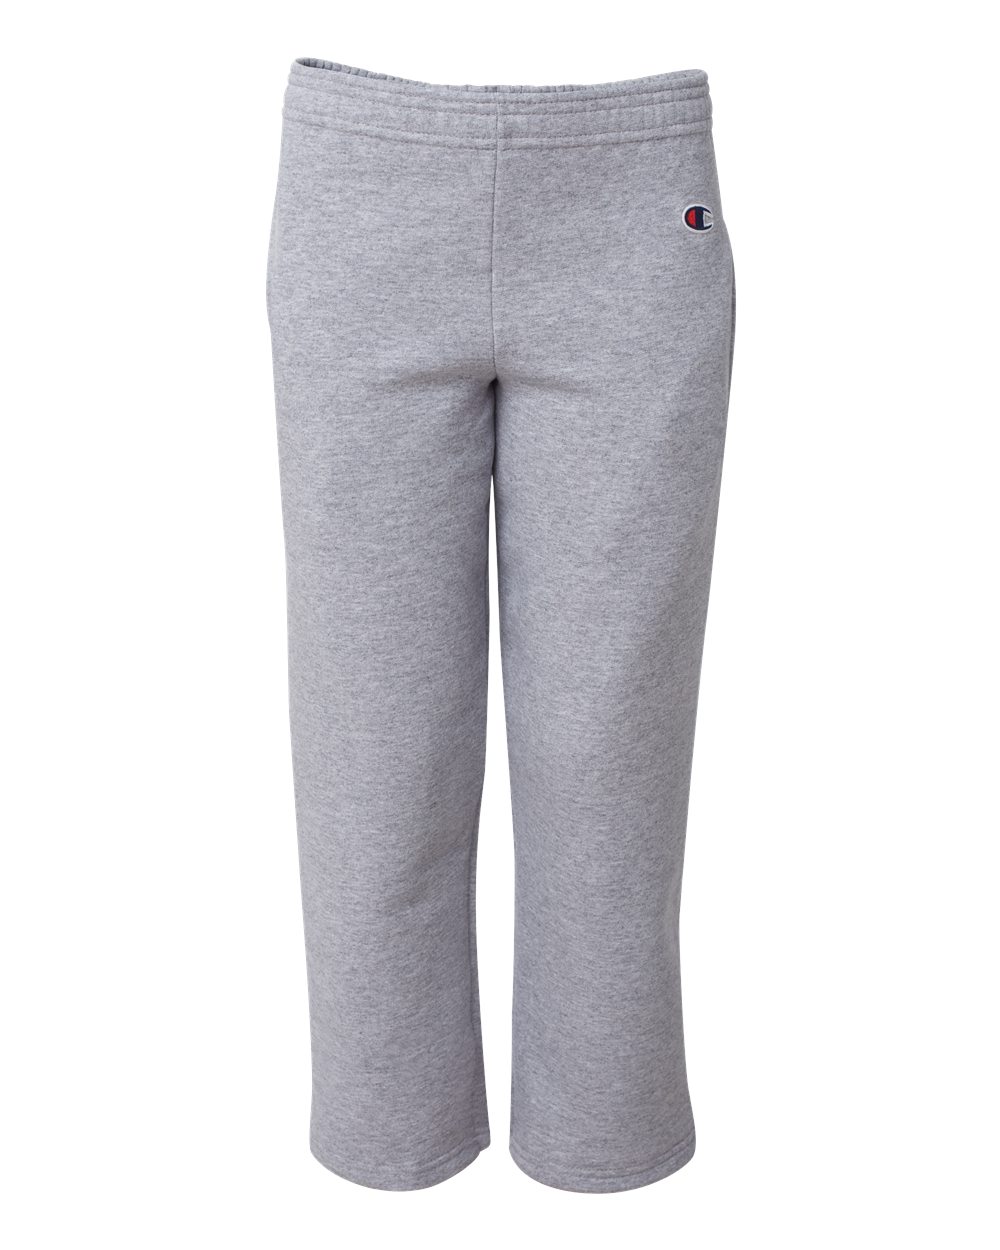 Champion P890 - Double Dry Eco Youth Open Bottom Sweatpants with Pockets